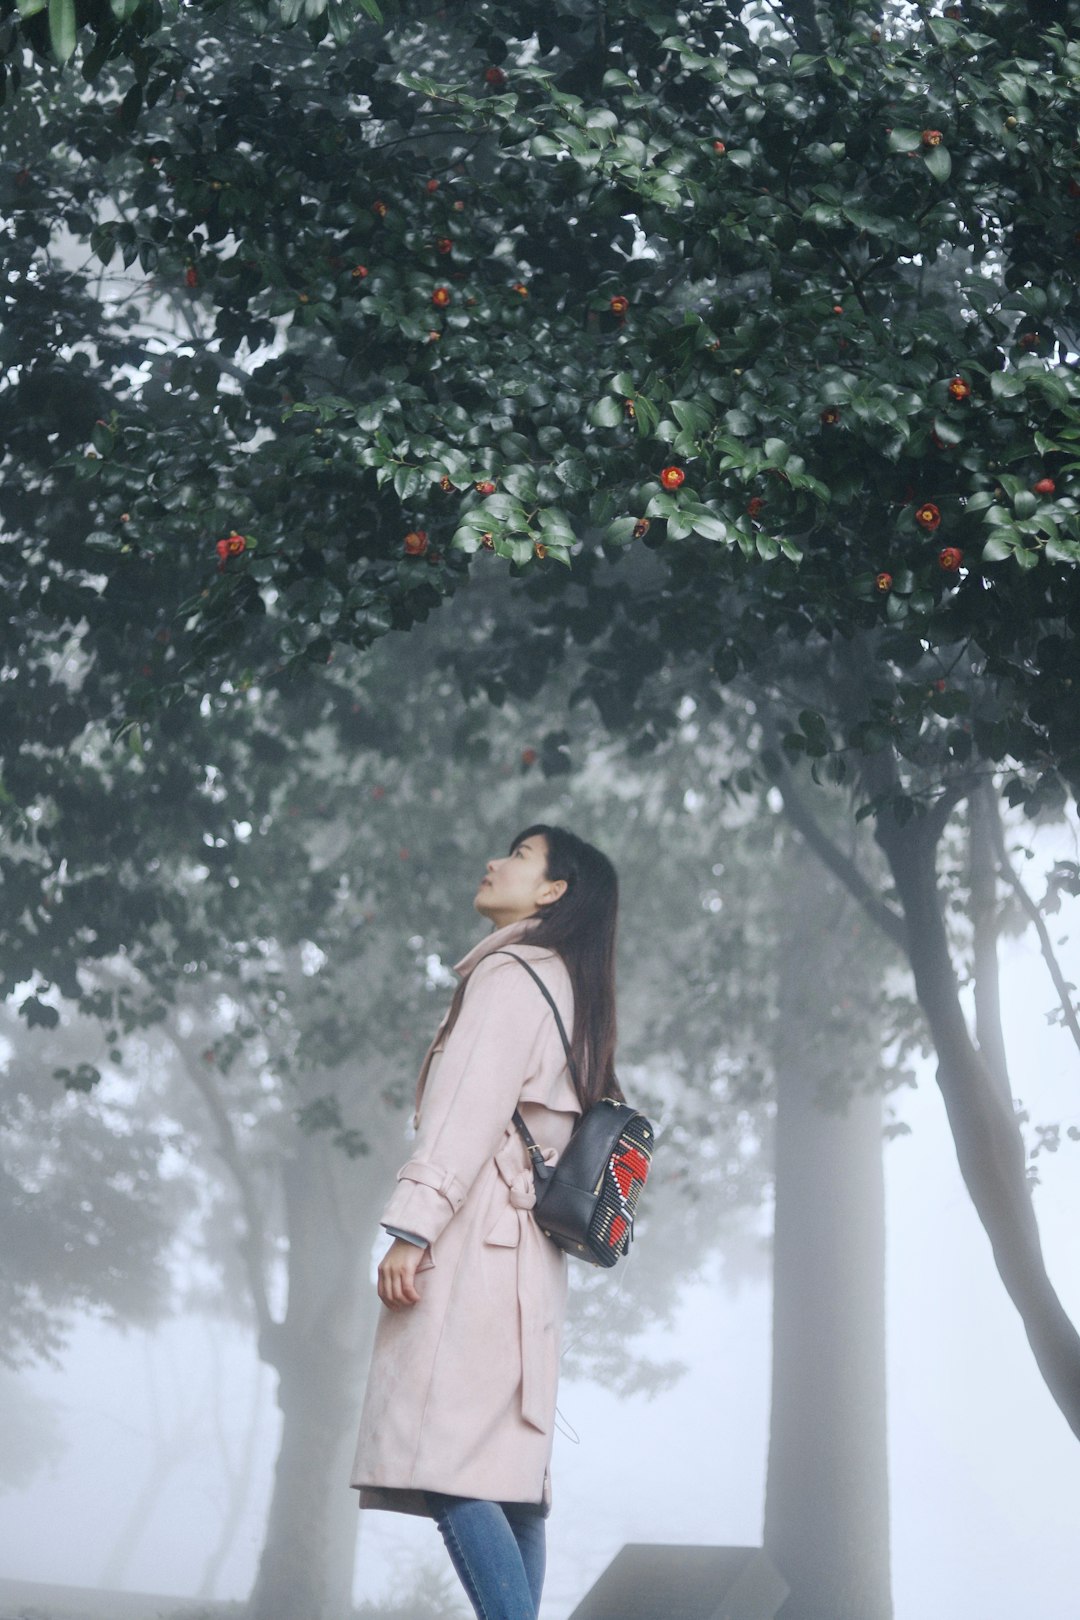 woman wearing white coat standing near the trees